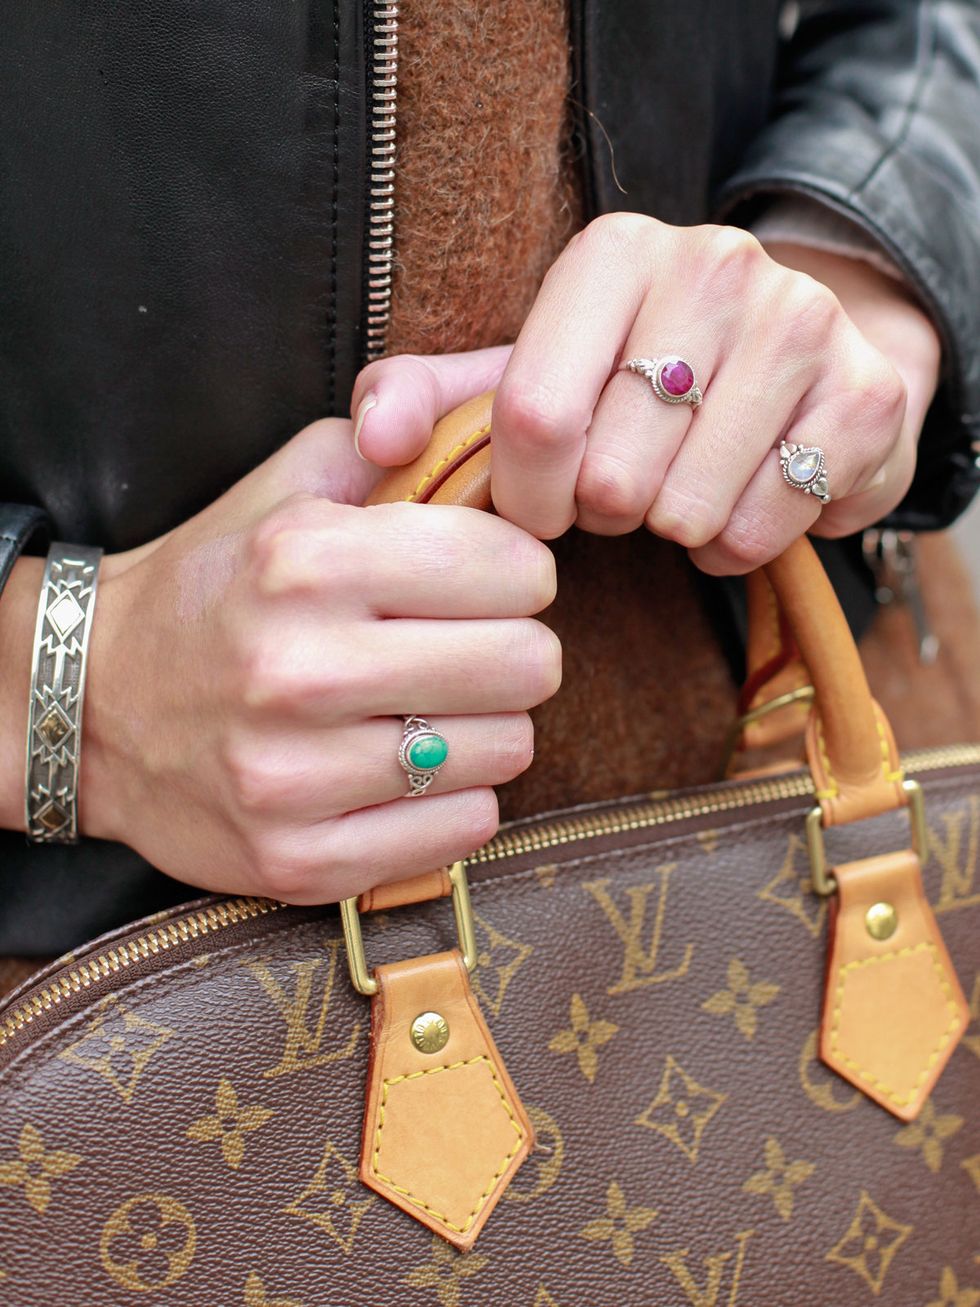 Finger, Brown, Wrist, Hand, Fashion accessory, Style, Nail, Fashion, Tan, Leather, 